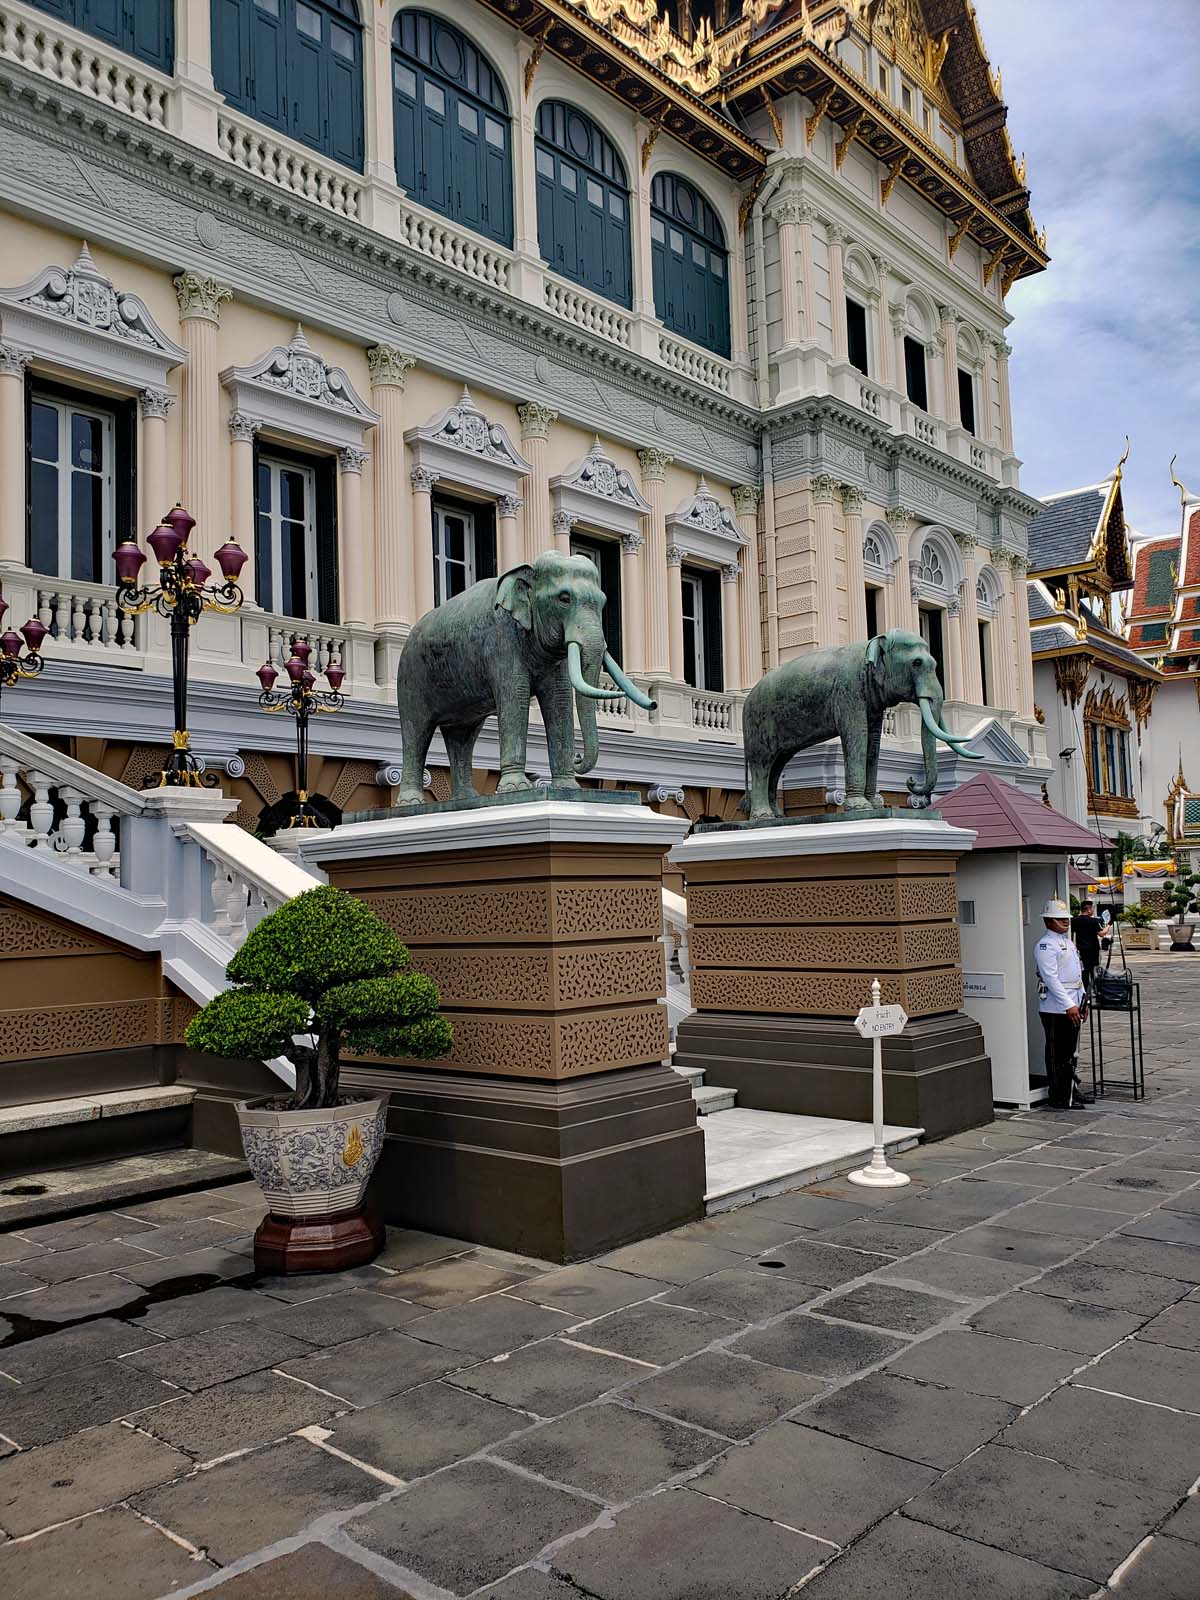 The entrance to the Grand Palace with the guard.